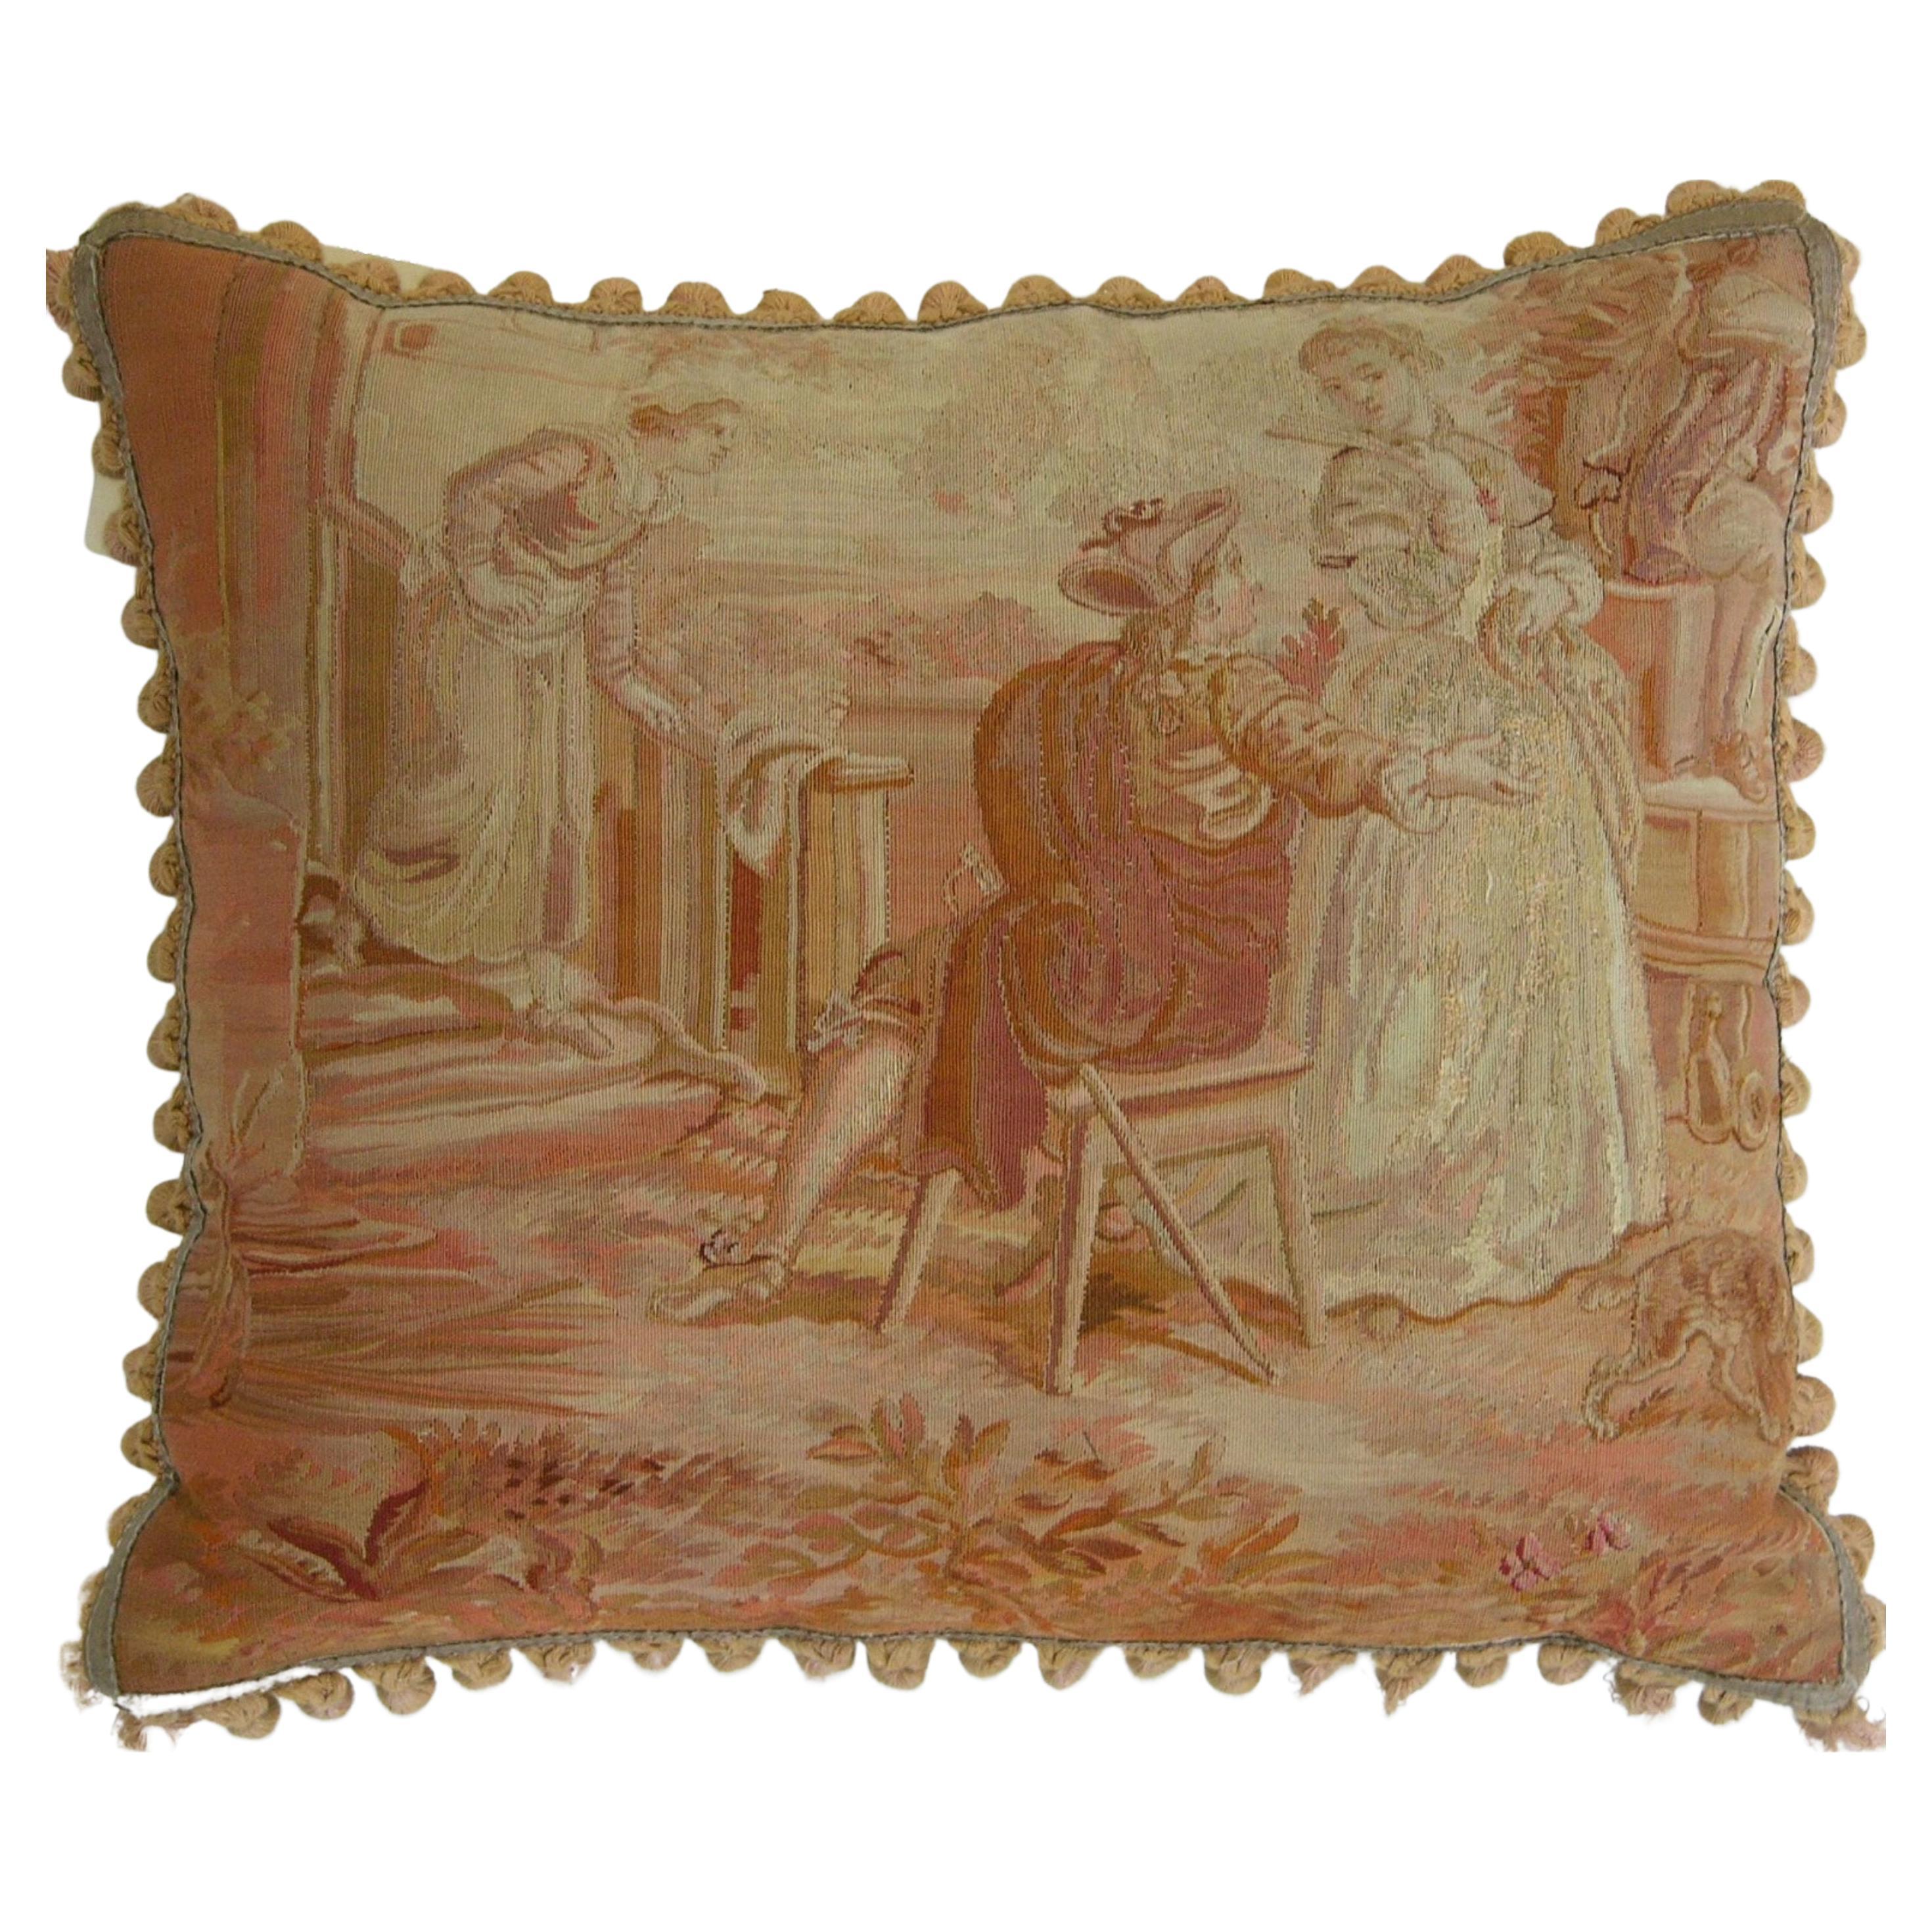 Circa 1850 Antique French Aubusson Tapestry Pillow For Sale